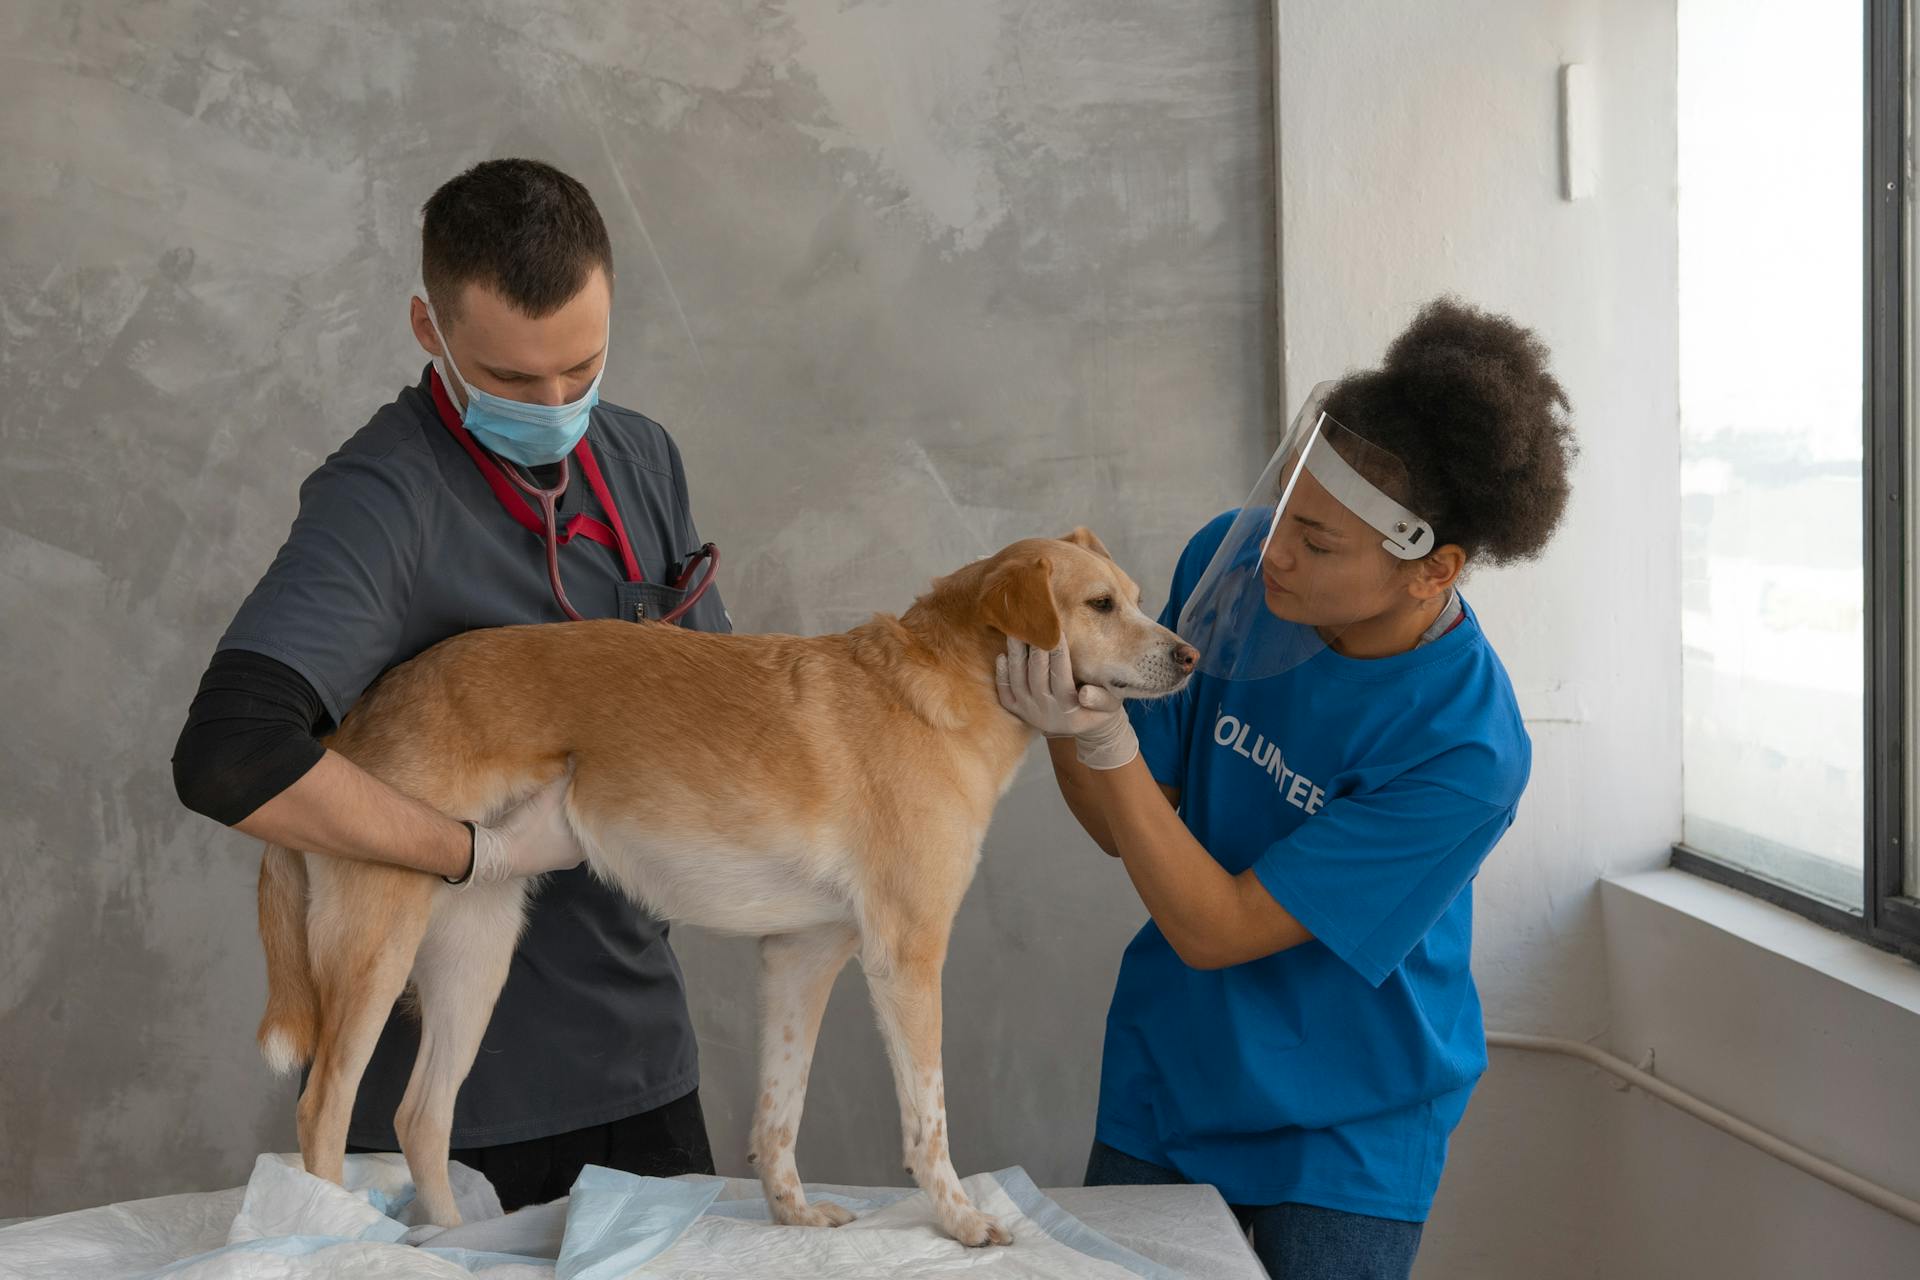 Vets positioning a dog to safely insert a microchip